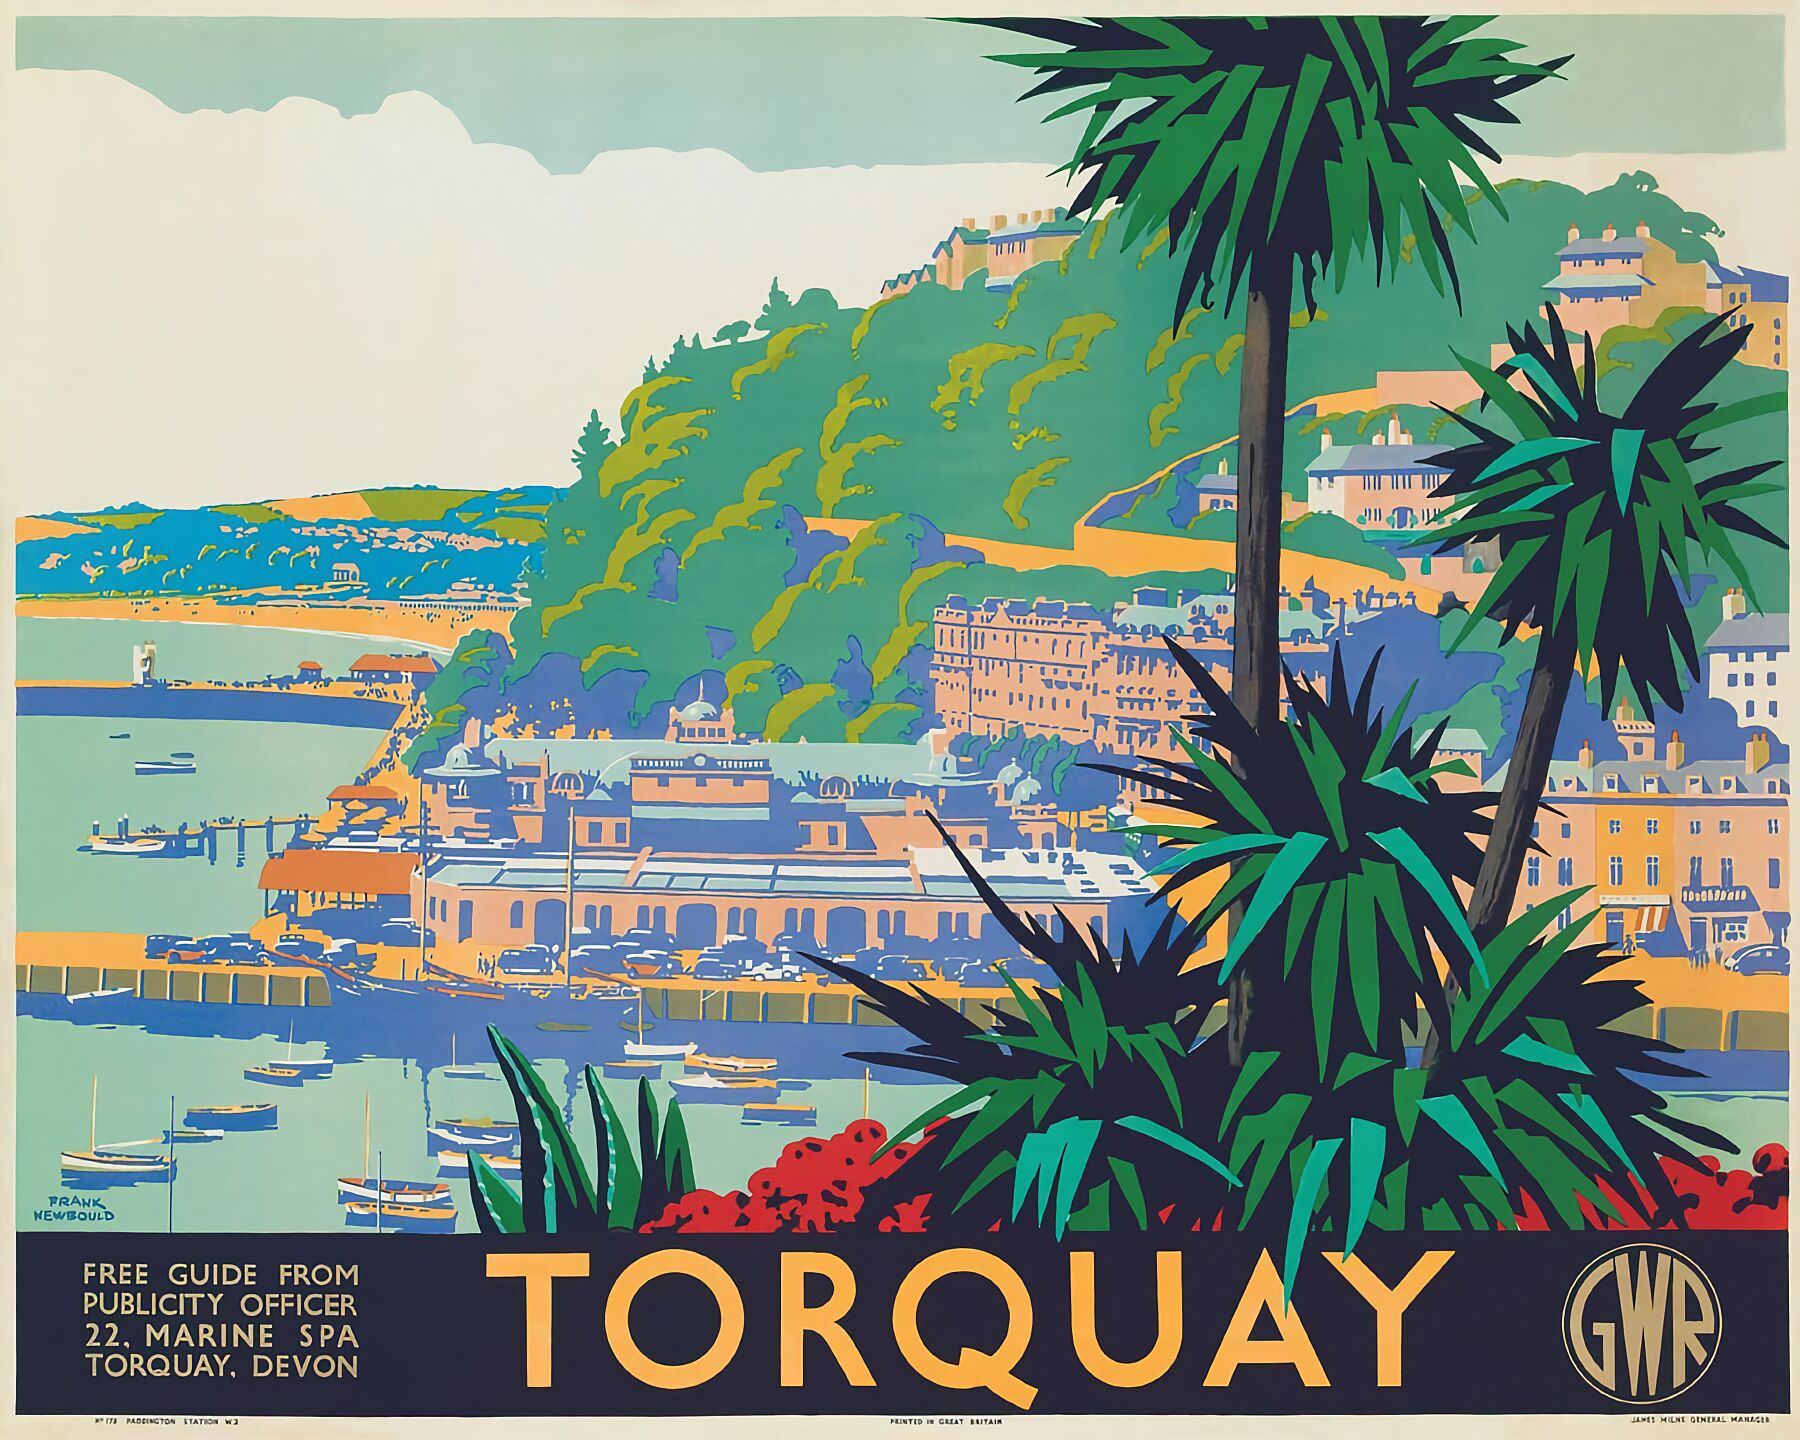 Torquay Poster by Frank Newbould - 1945